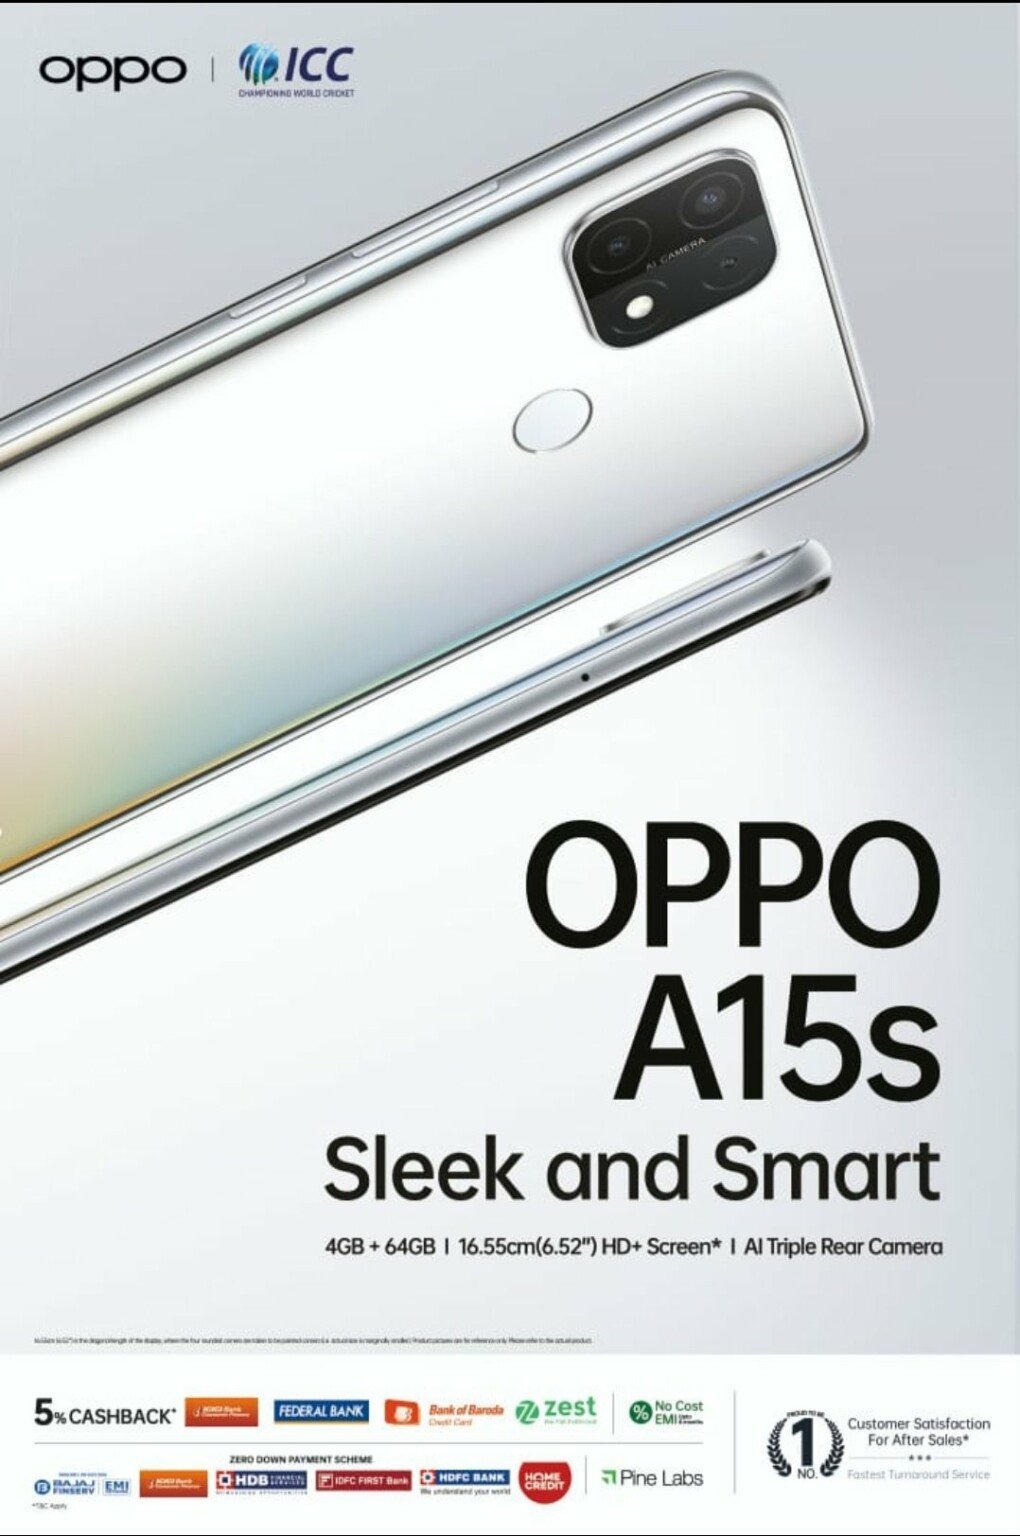 OPPO A15s leaked promo pic